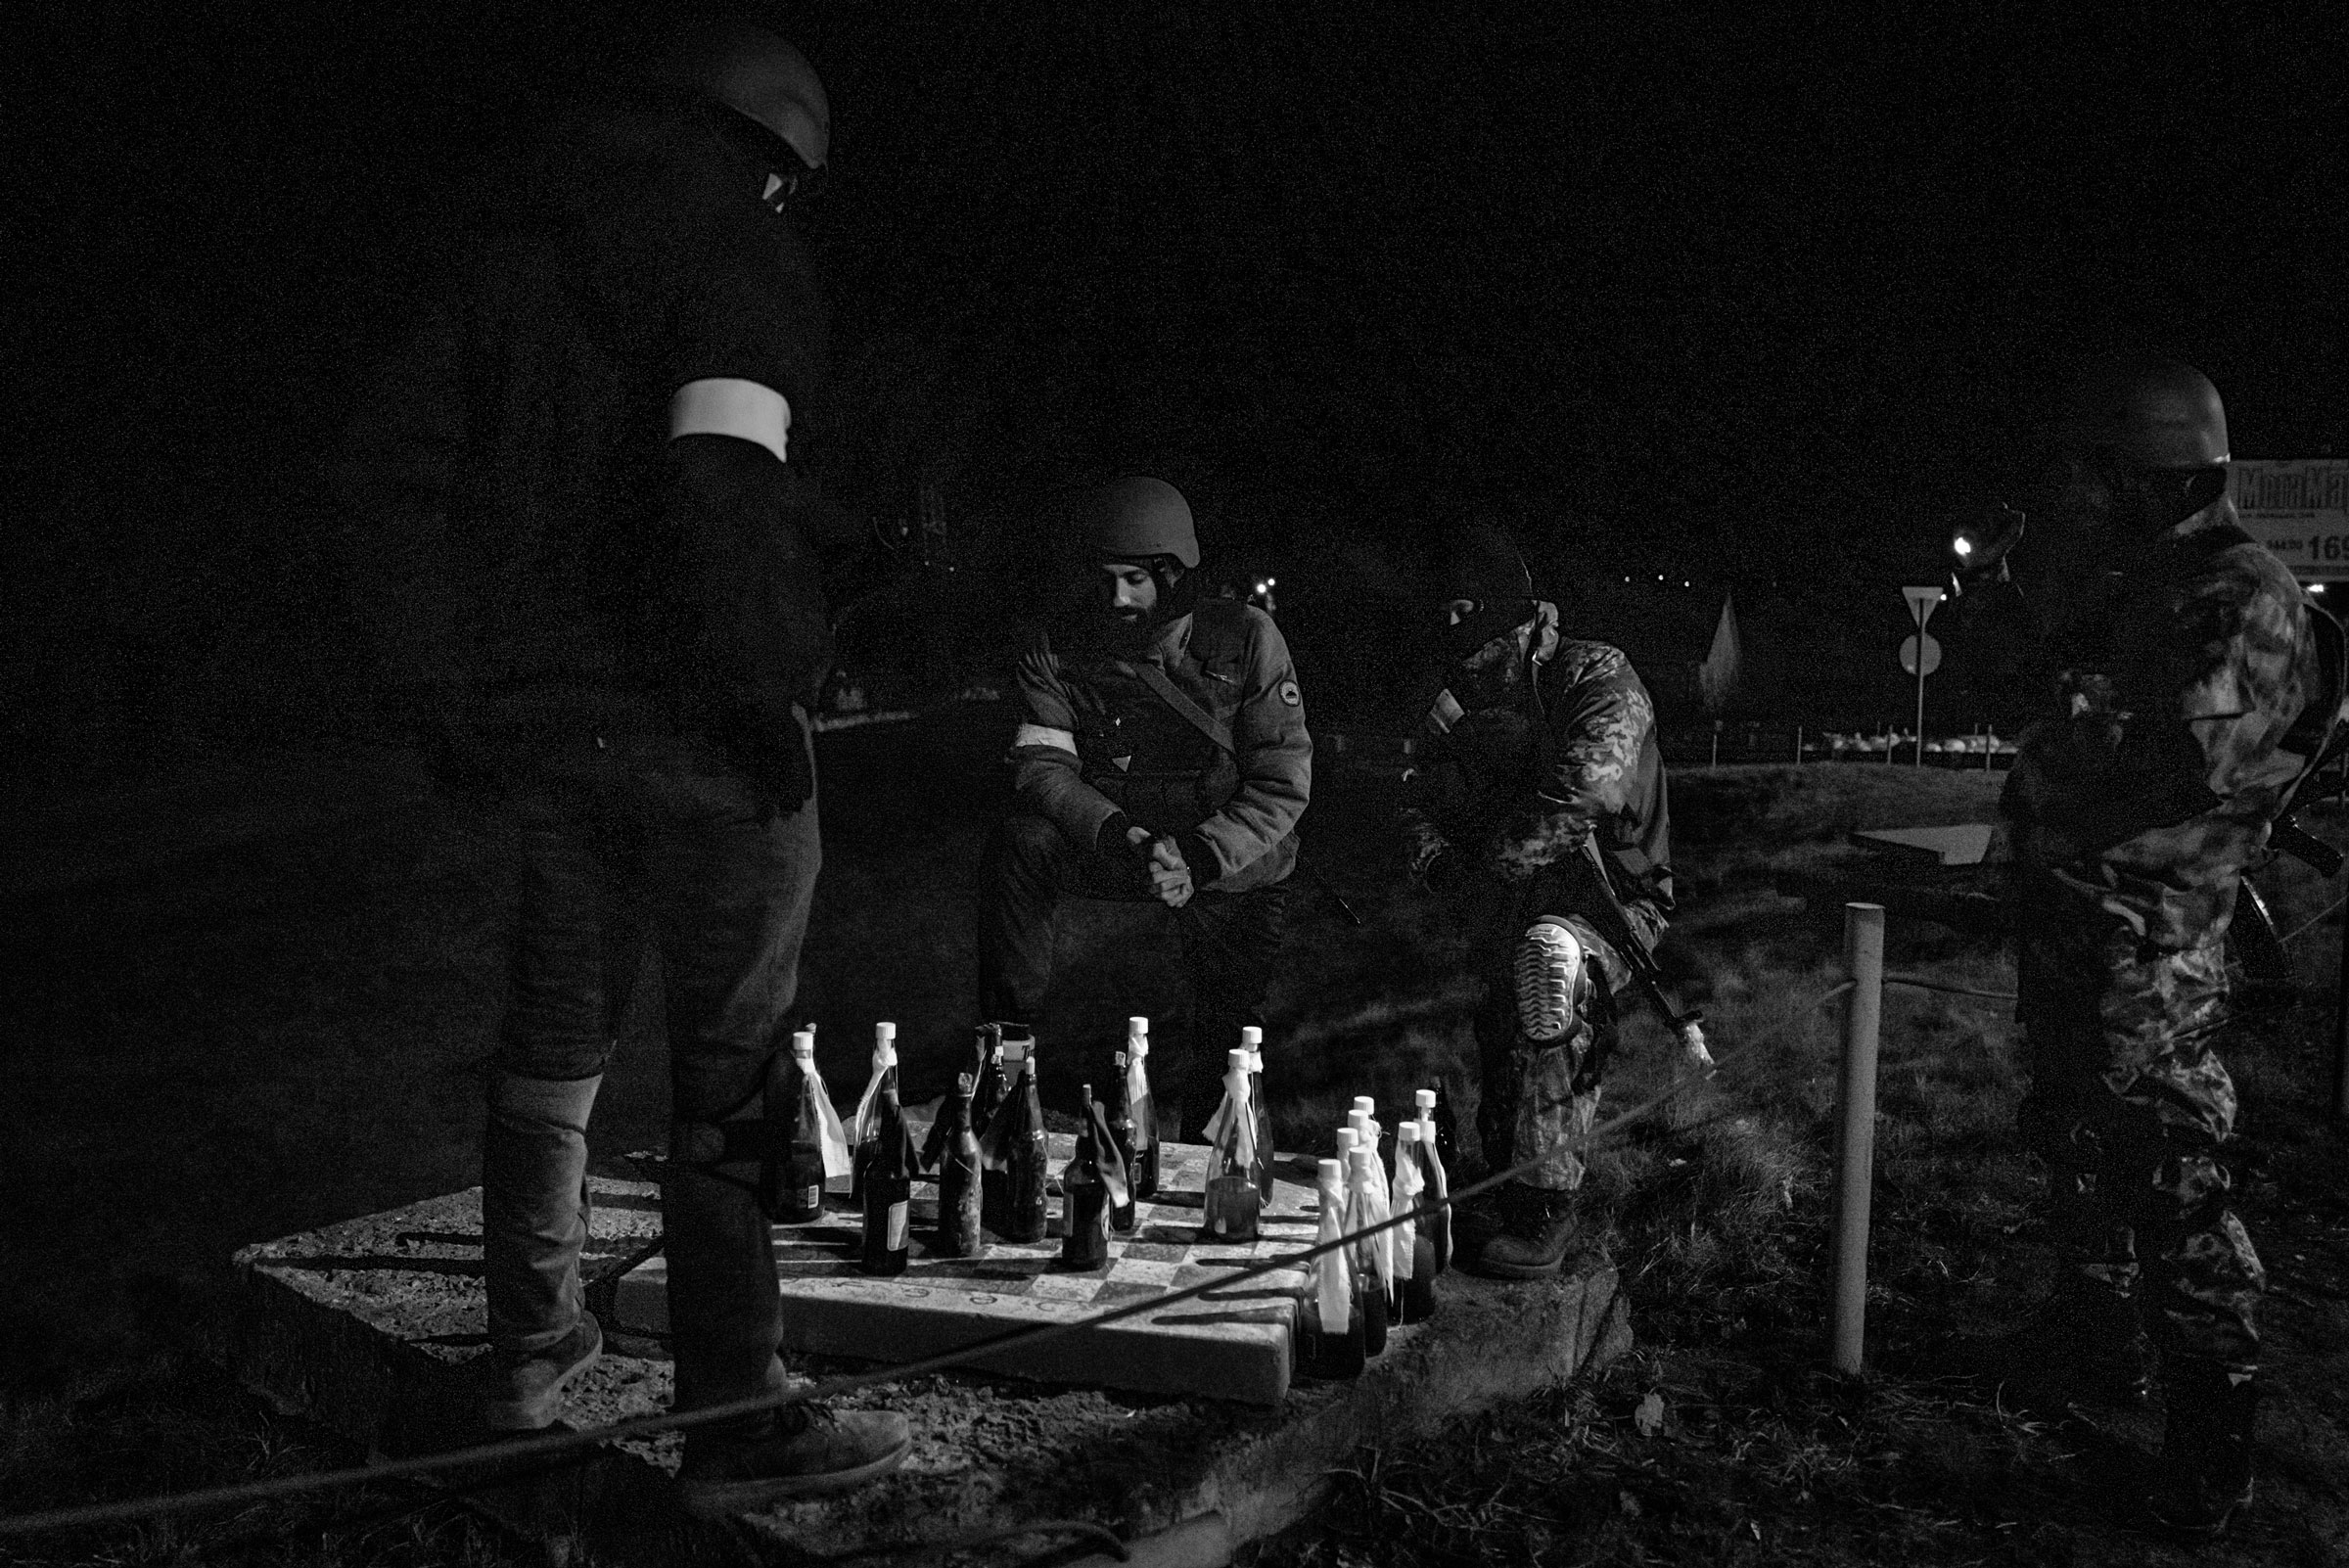 Members the Territorial Defense Forces who guard a large checkpoint briefly played a game of checkers with Molotov cocktails, as seen on the eastern outskirts of Kyiv, Ukraine, on March 5. With few vehicles passing because of the nighttime curfew, Territorial Defense members can have a moment of quiet while remaining on high alert for any suspicious activity. (Nicole Tung for Harper’s Magazine)